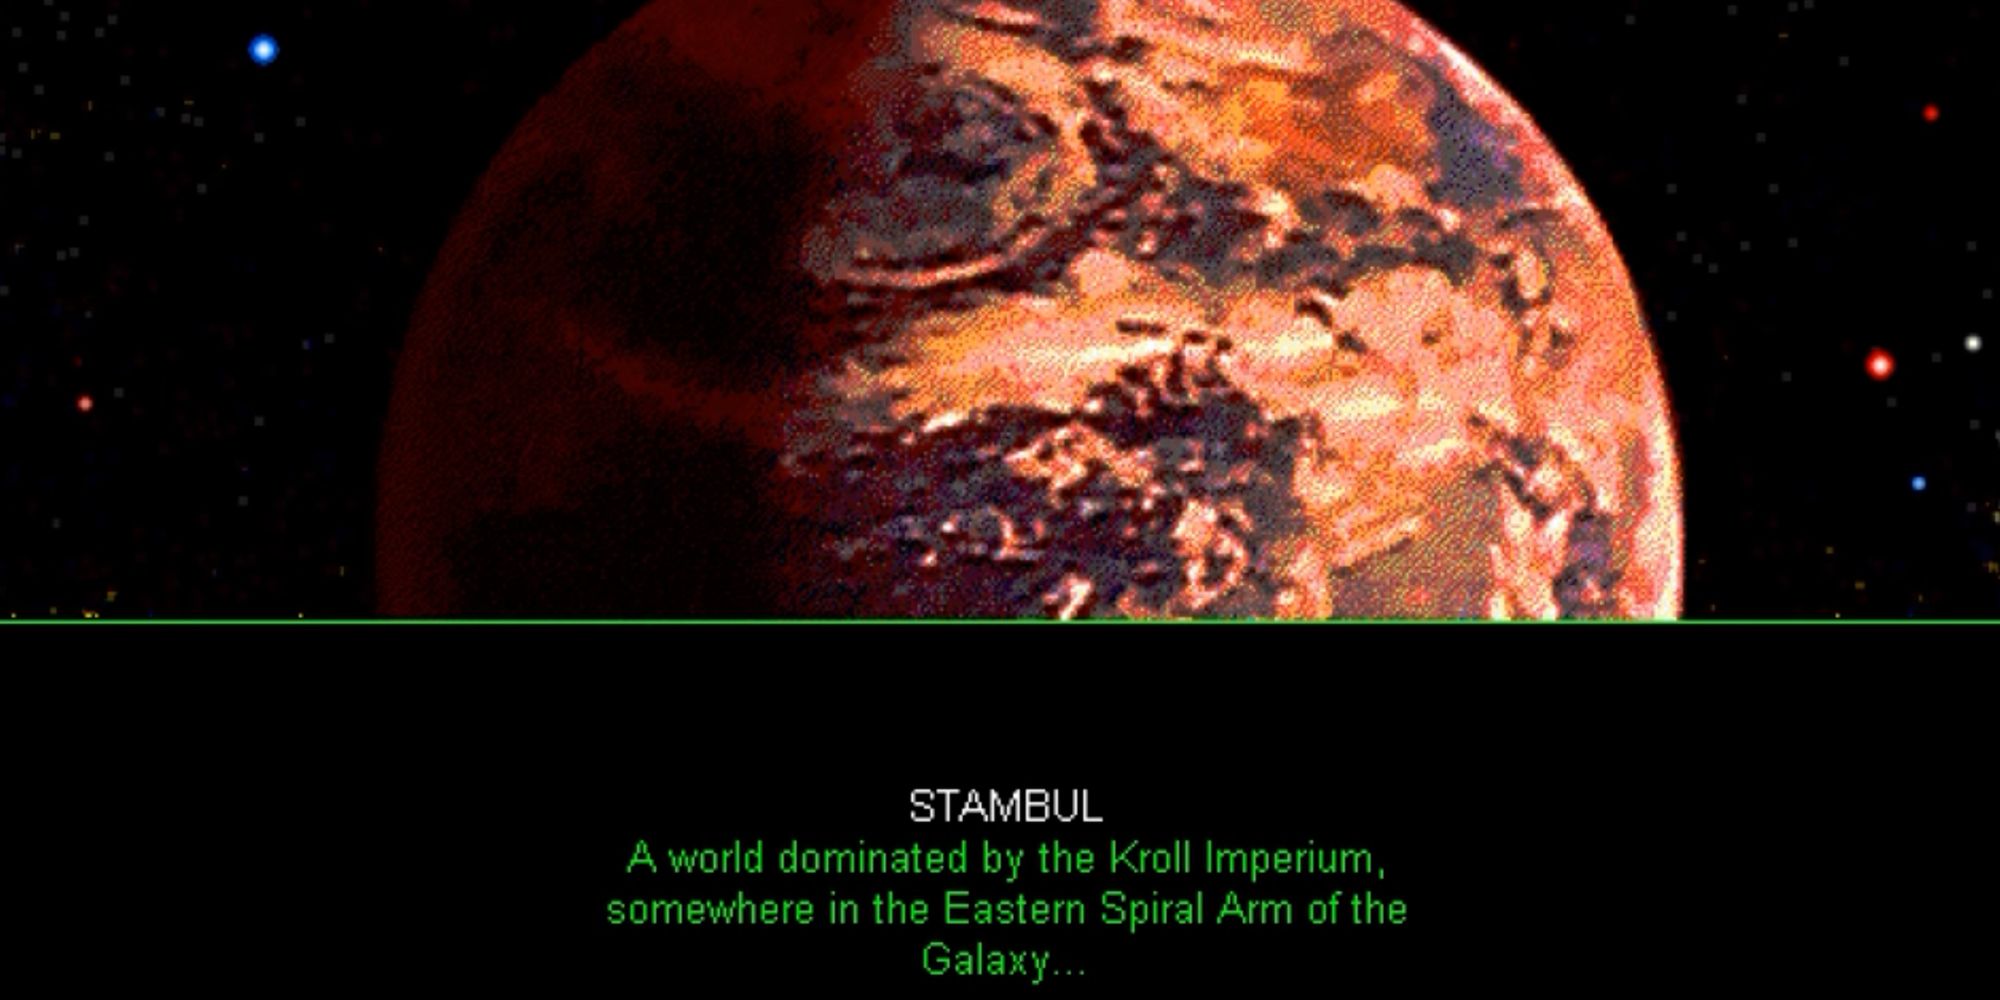 A screenshot from Spaceship Warlock's opening cinematic, showing a character named Stambul telling the player about a distant planet